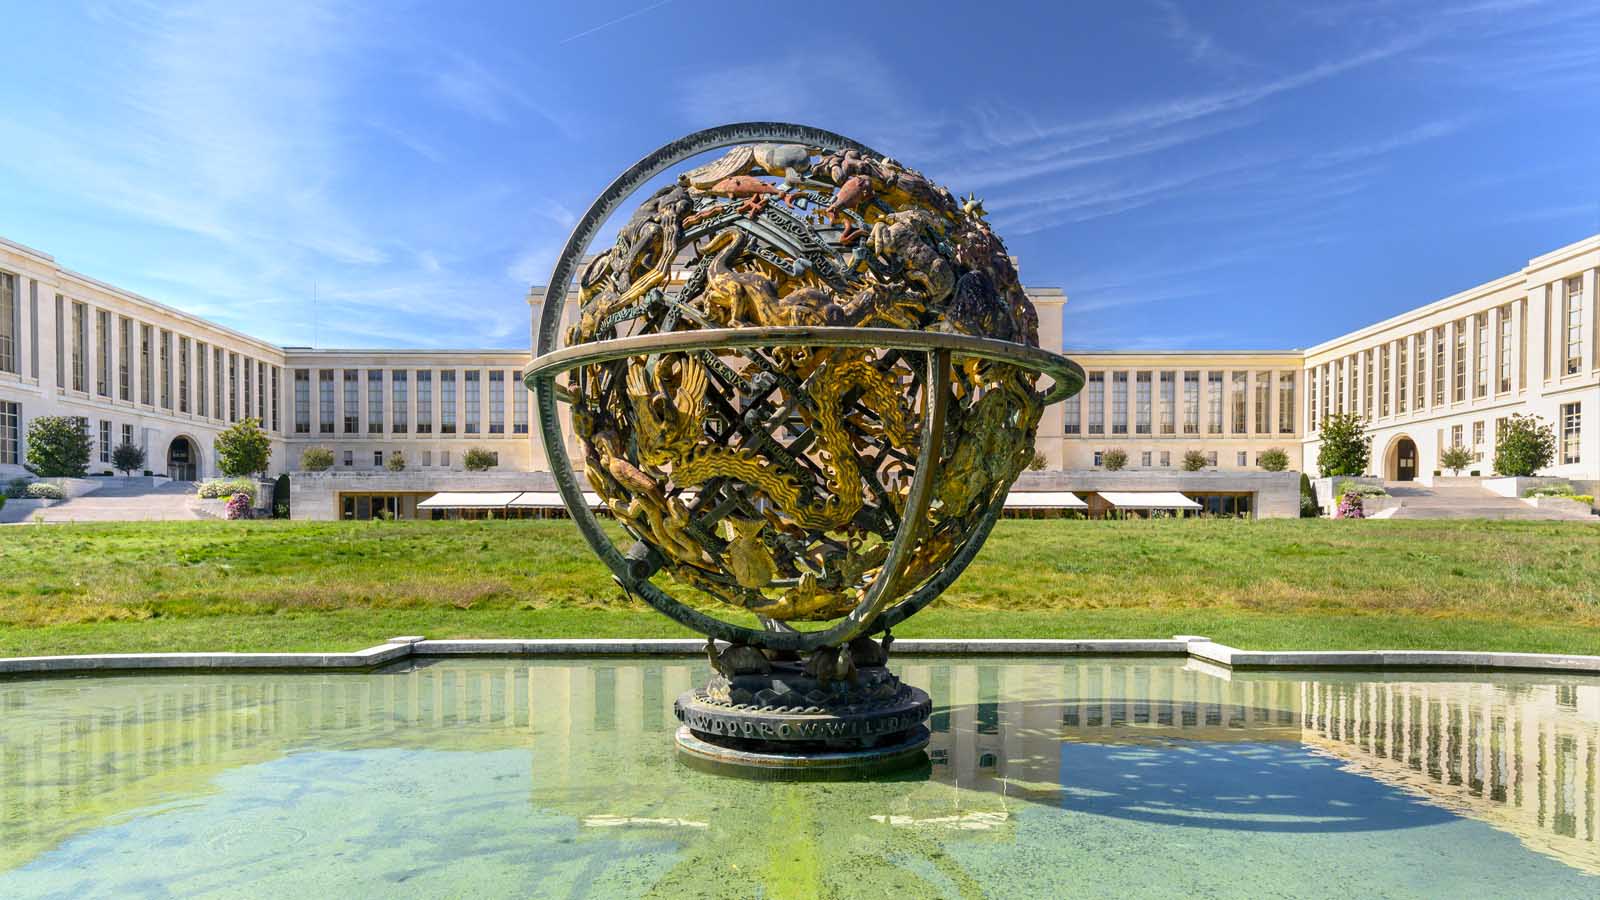  statue of the globe in a founain in front of the white building of the United Nations Palace, the UN headquarter in Geneva